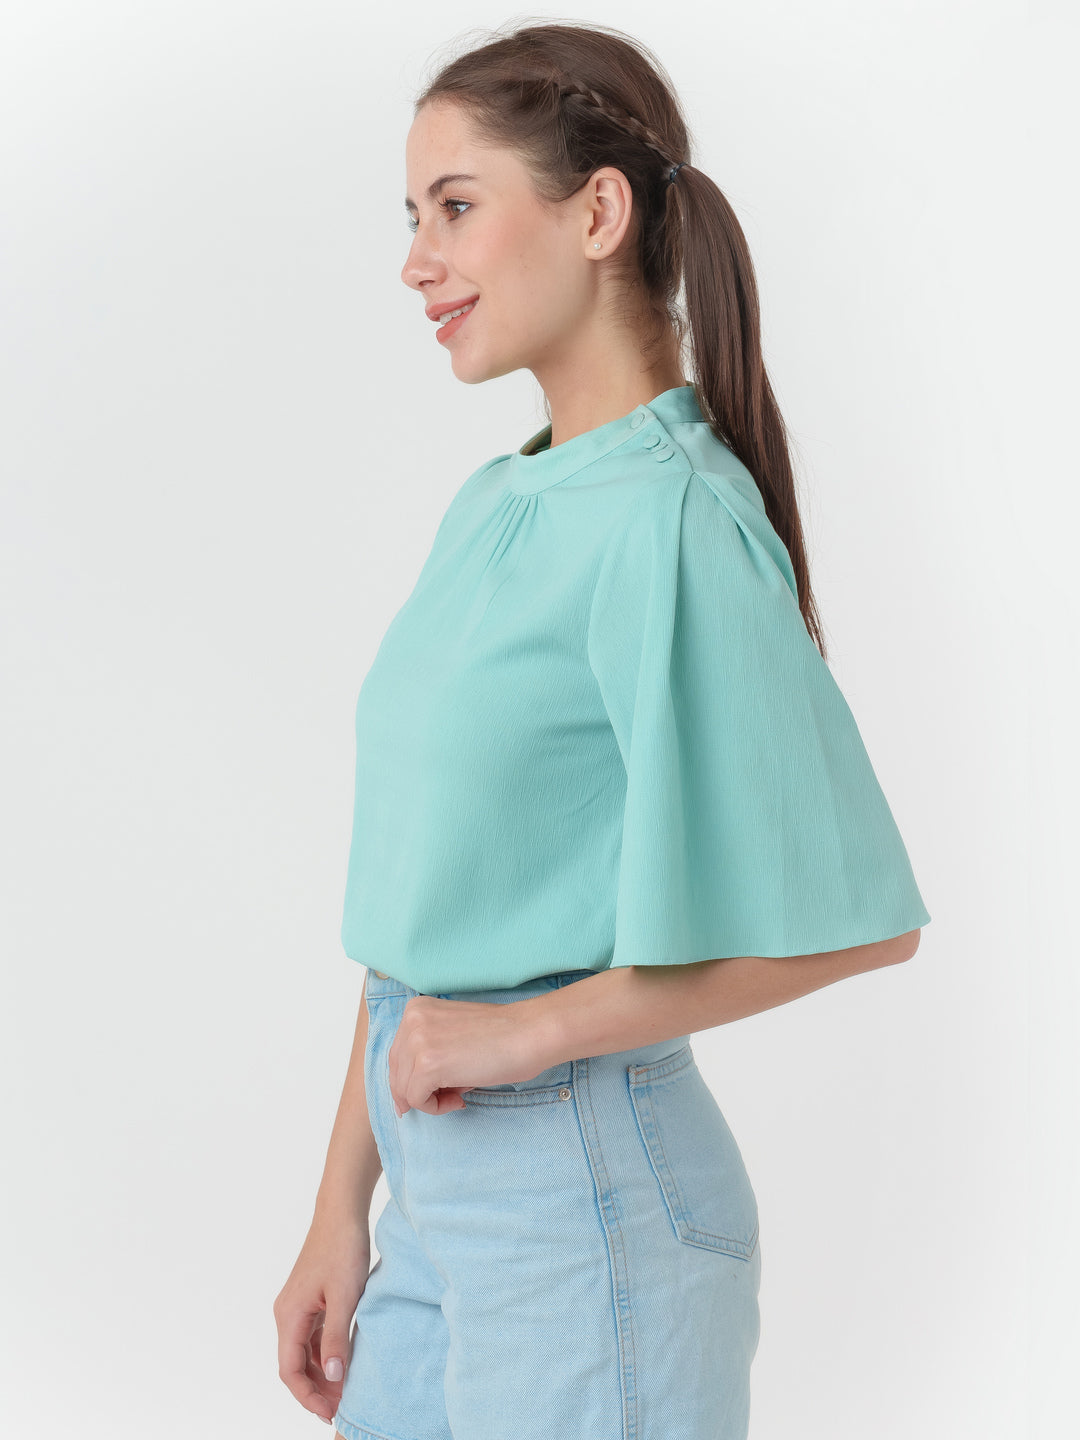 Turquoise_Solid_Regular_Top_3